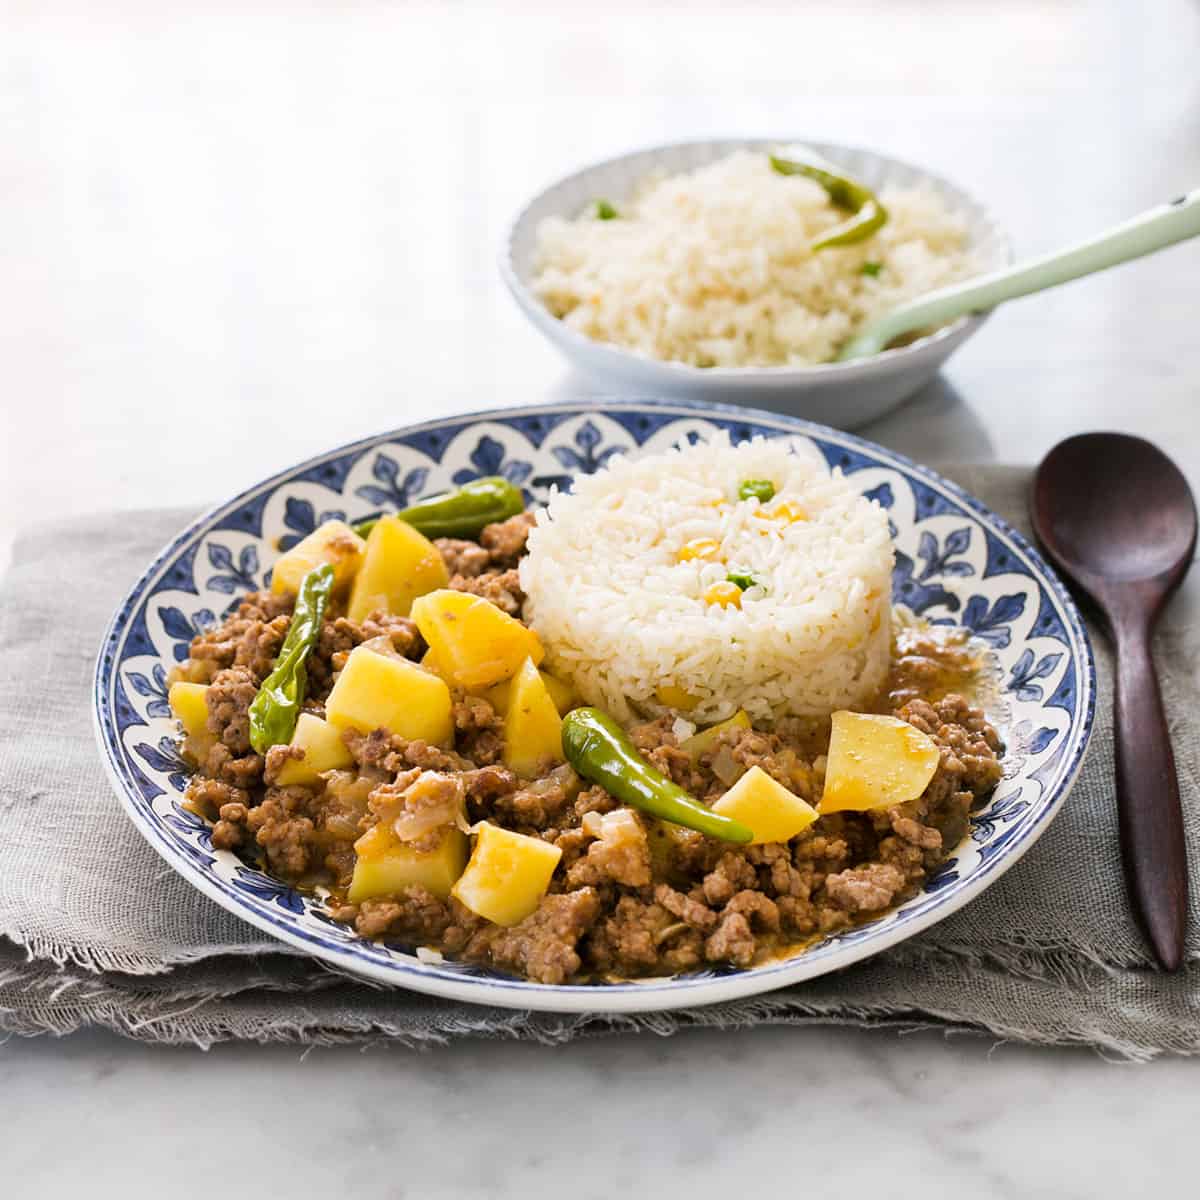 Mexican picadillo recipe with potatoes and white rice as a side dish.